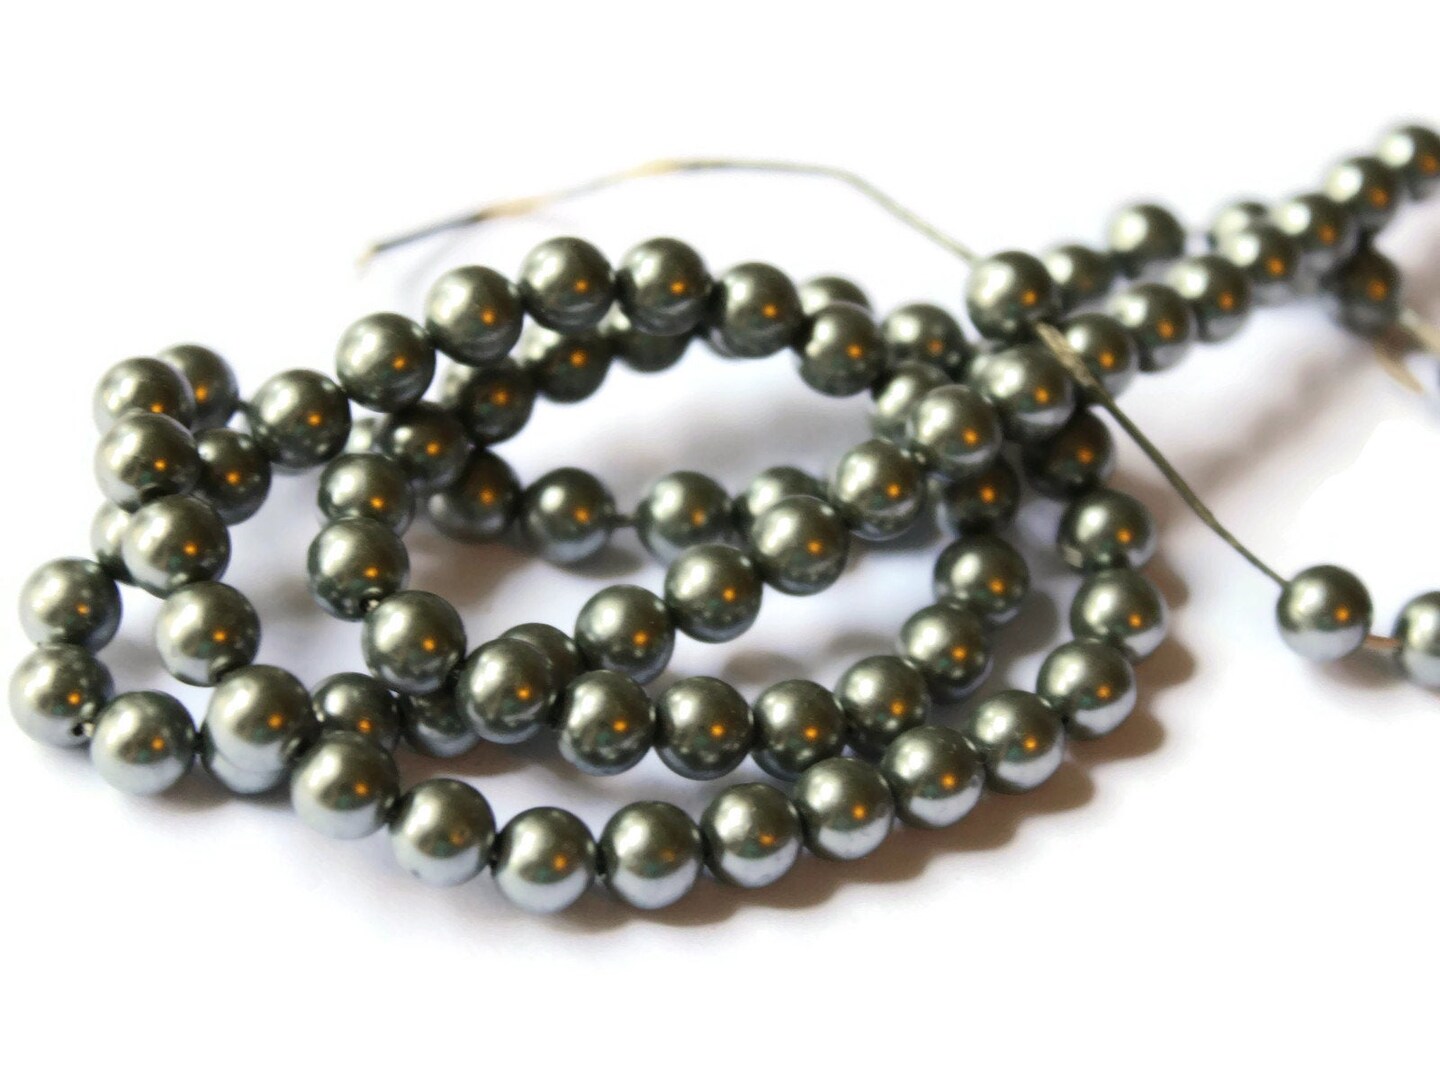 80 6mm Gray Vintage Plastic Round Faux Pearl Beads